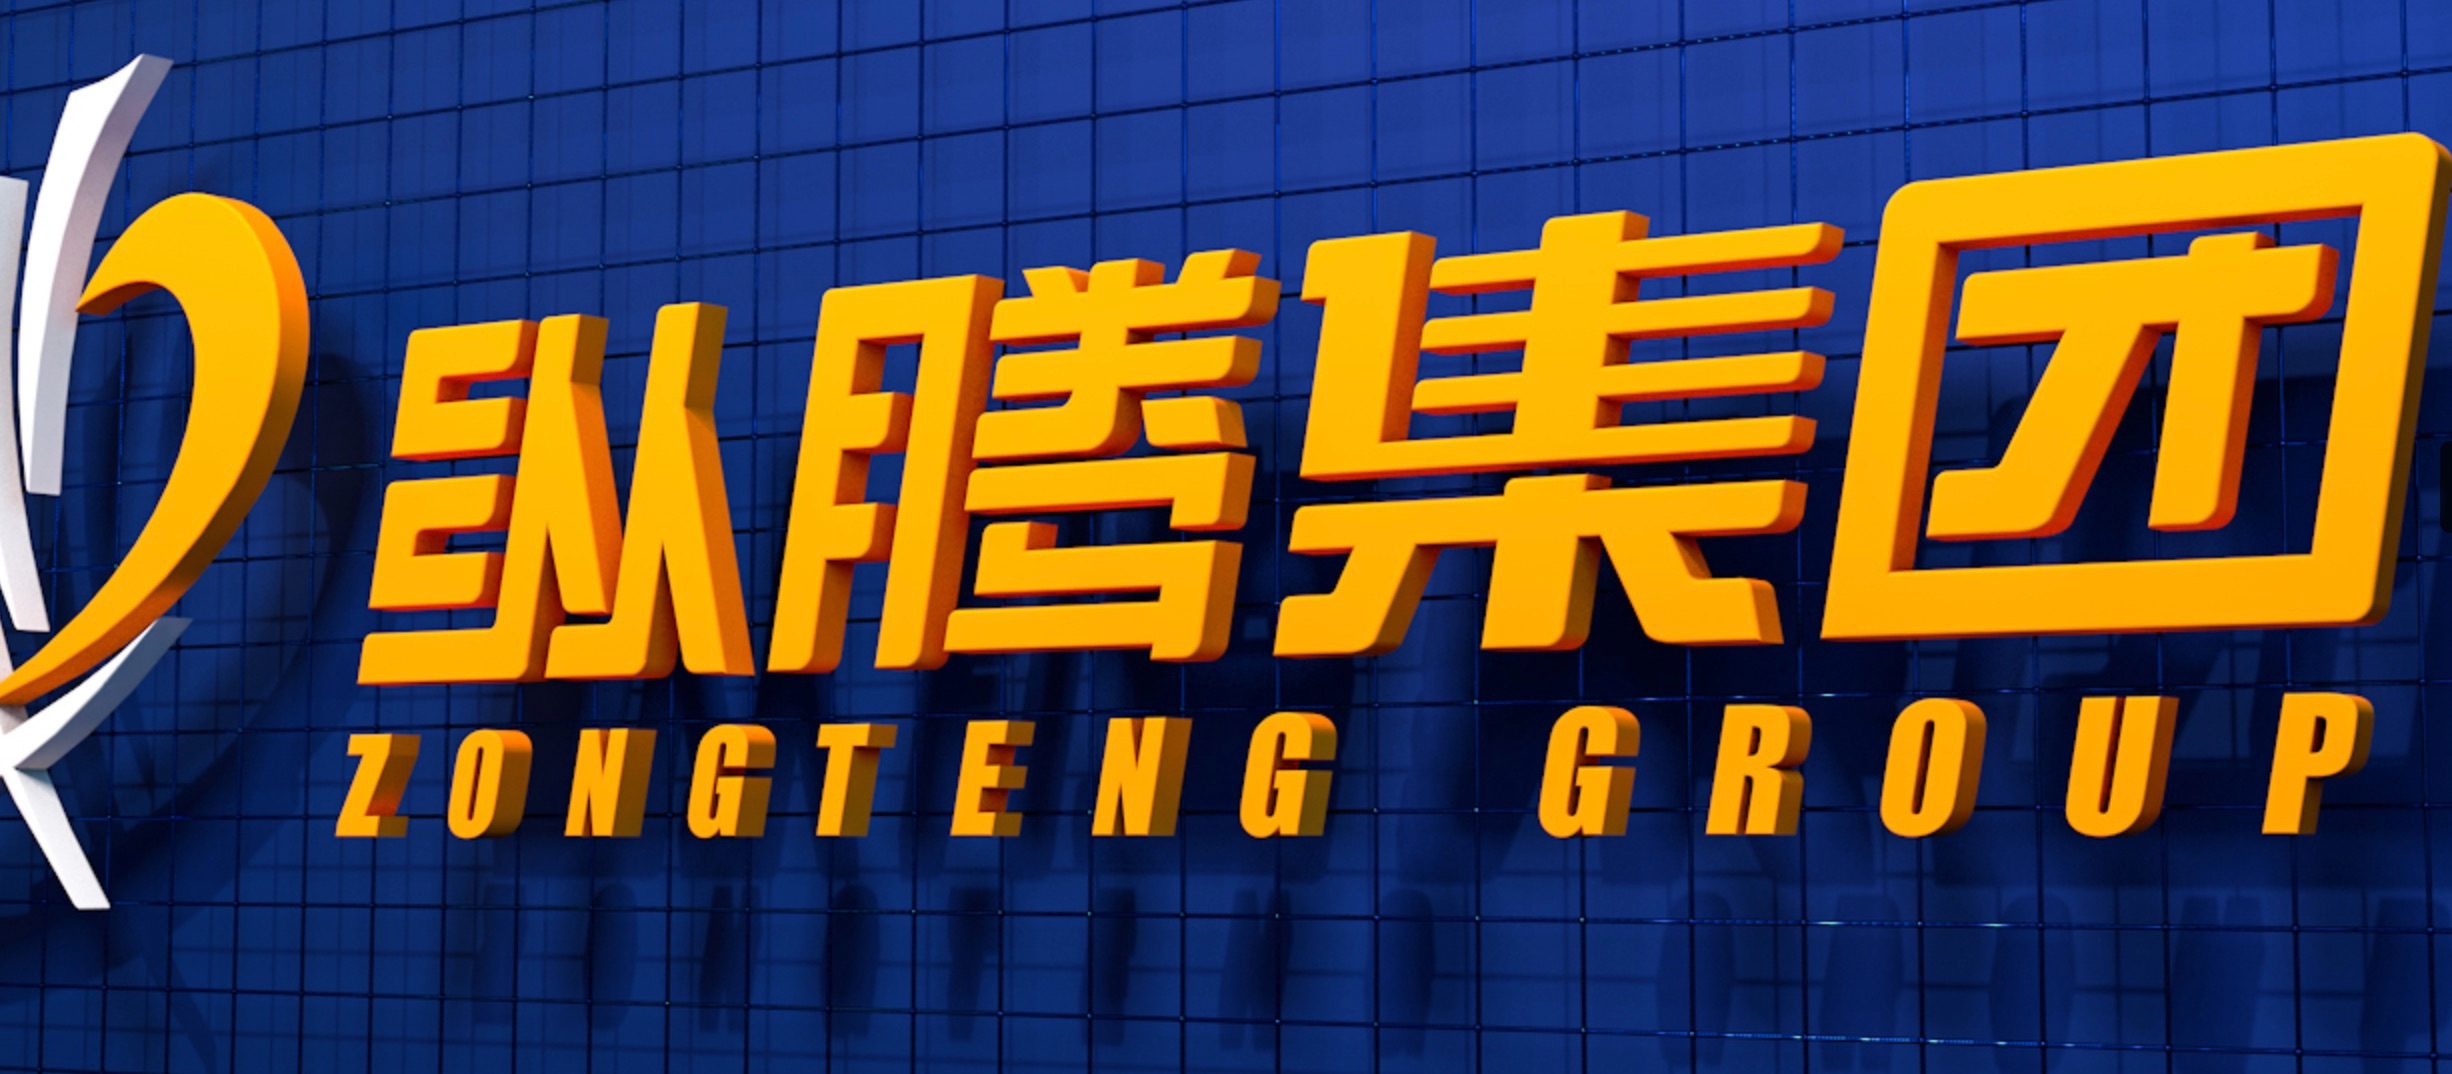 GLP-backed Chinese logistics enterprise Zongteng nets $71m in Series C1 round